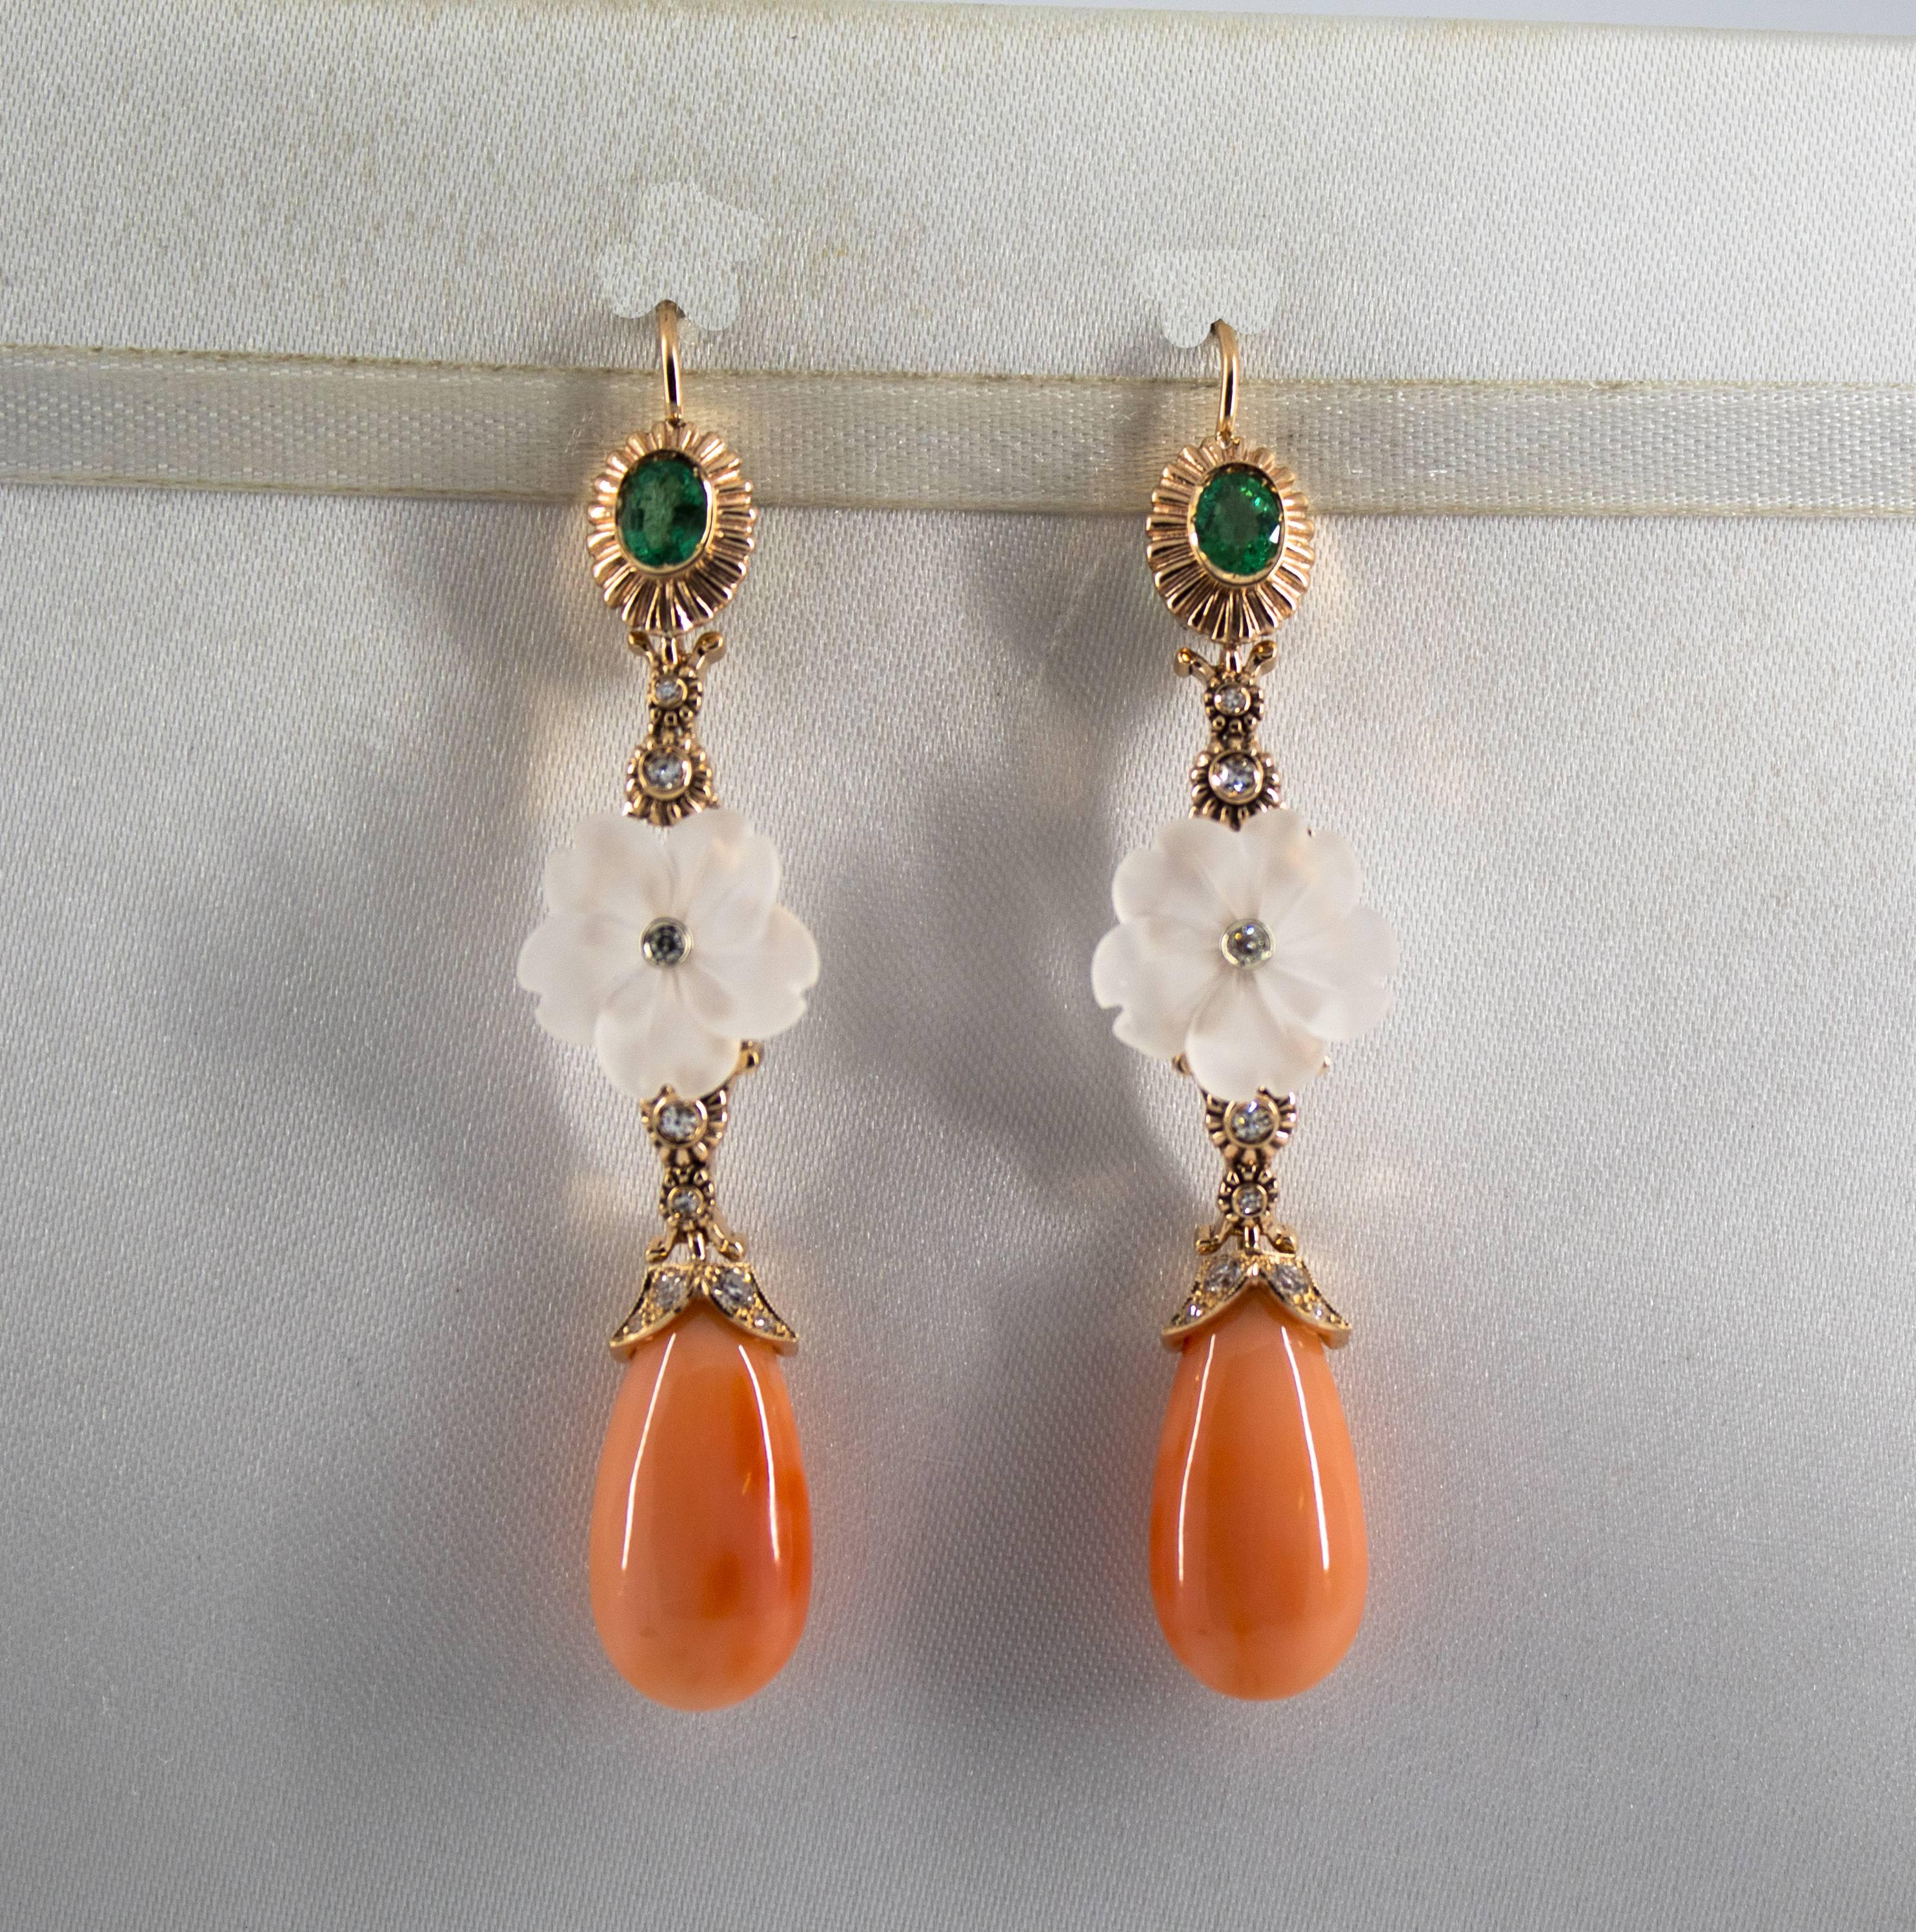 These Stud Earrings are made of 14K Yellow Gold.
These Earrings have 0.35 Carats of White Diamonds.
These Earrings have 1.00 Carats of Emeralds.
These Earrings have also Coral and Rock Crystal.
All our Earrings have pins for pierced ears but we can